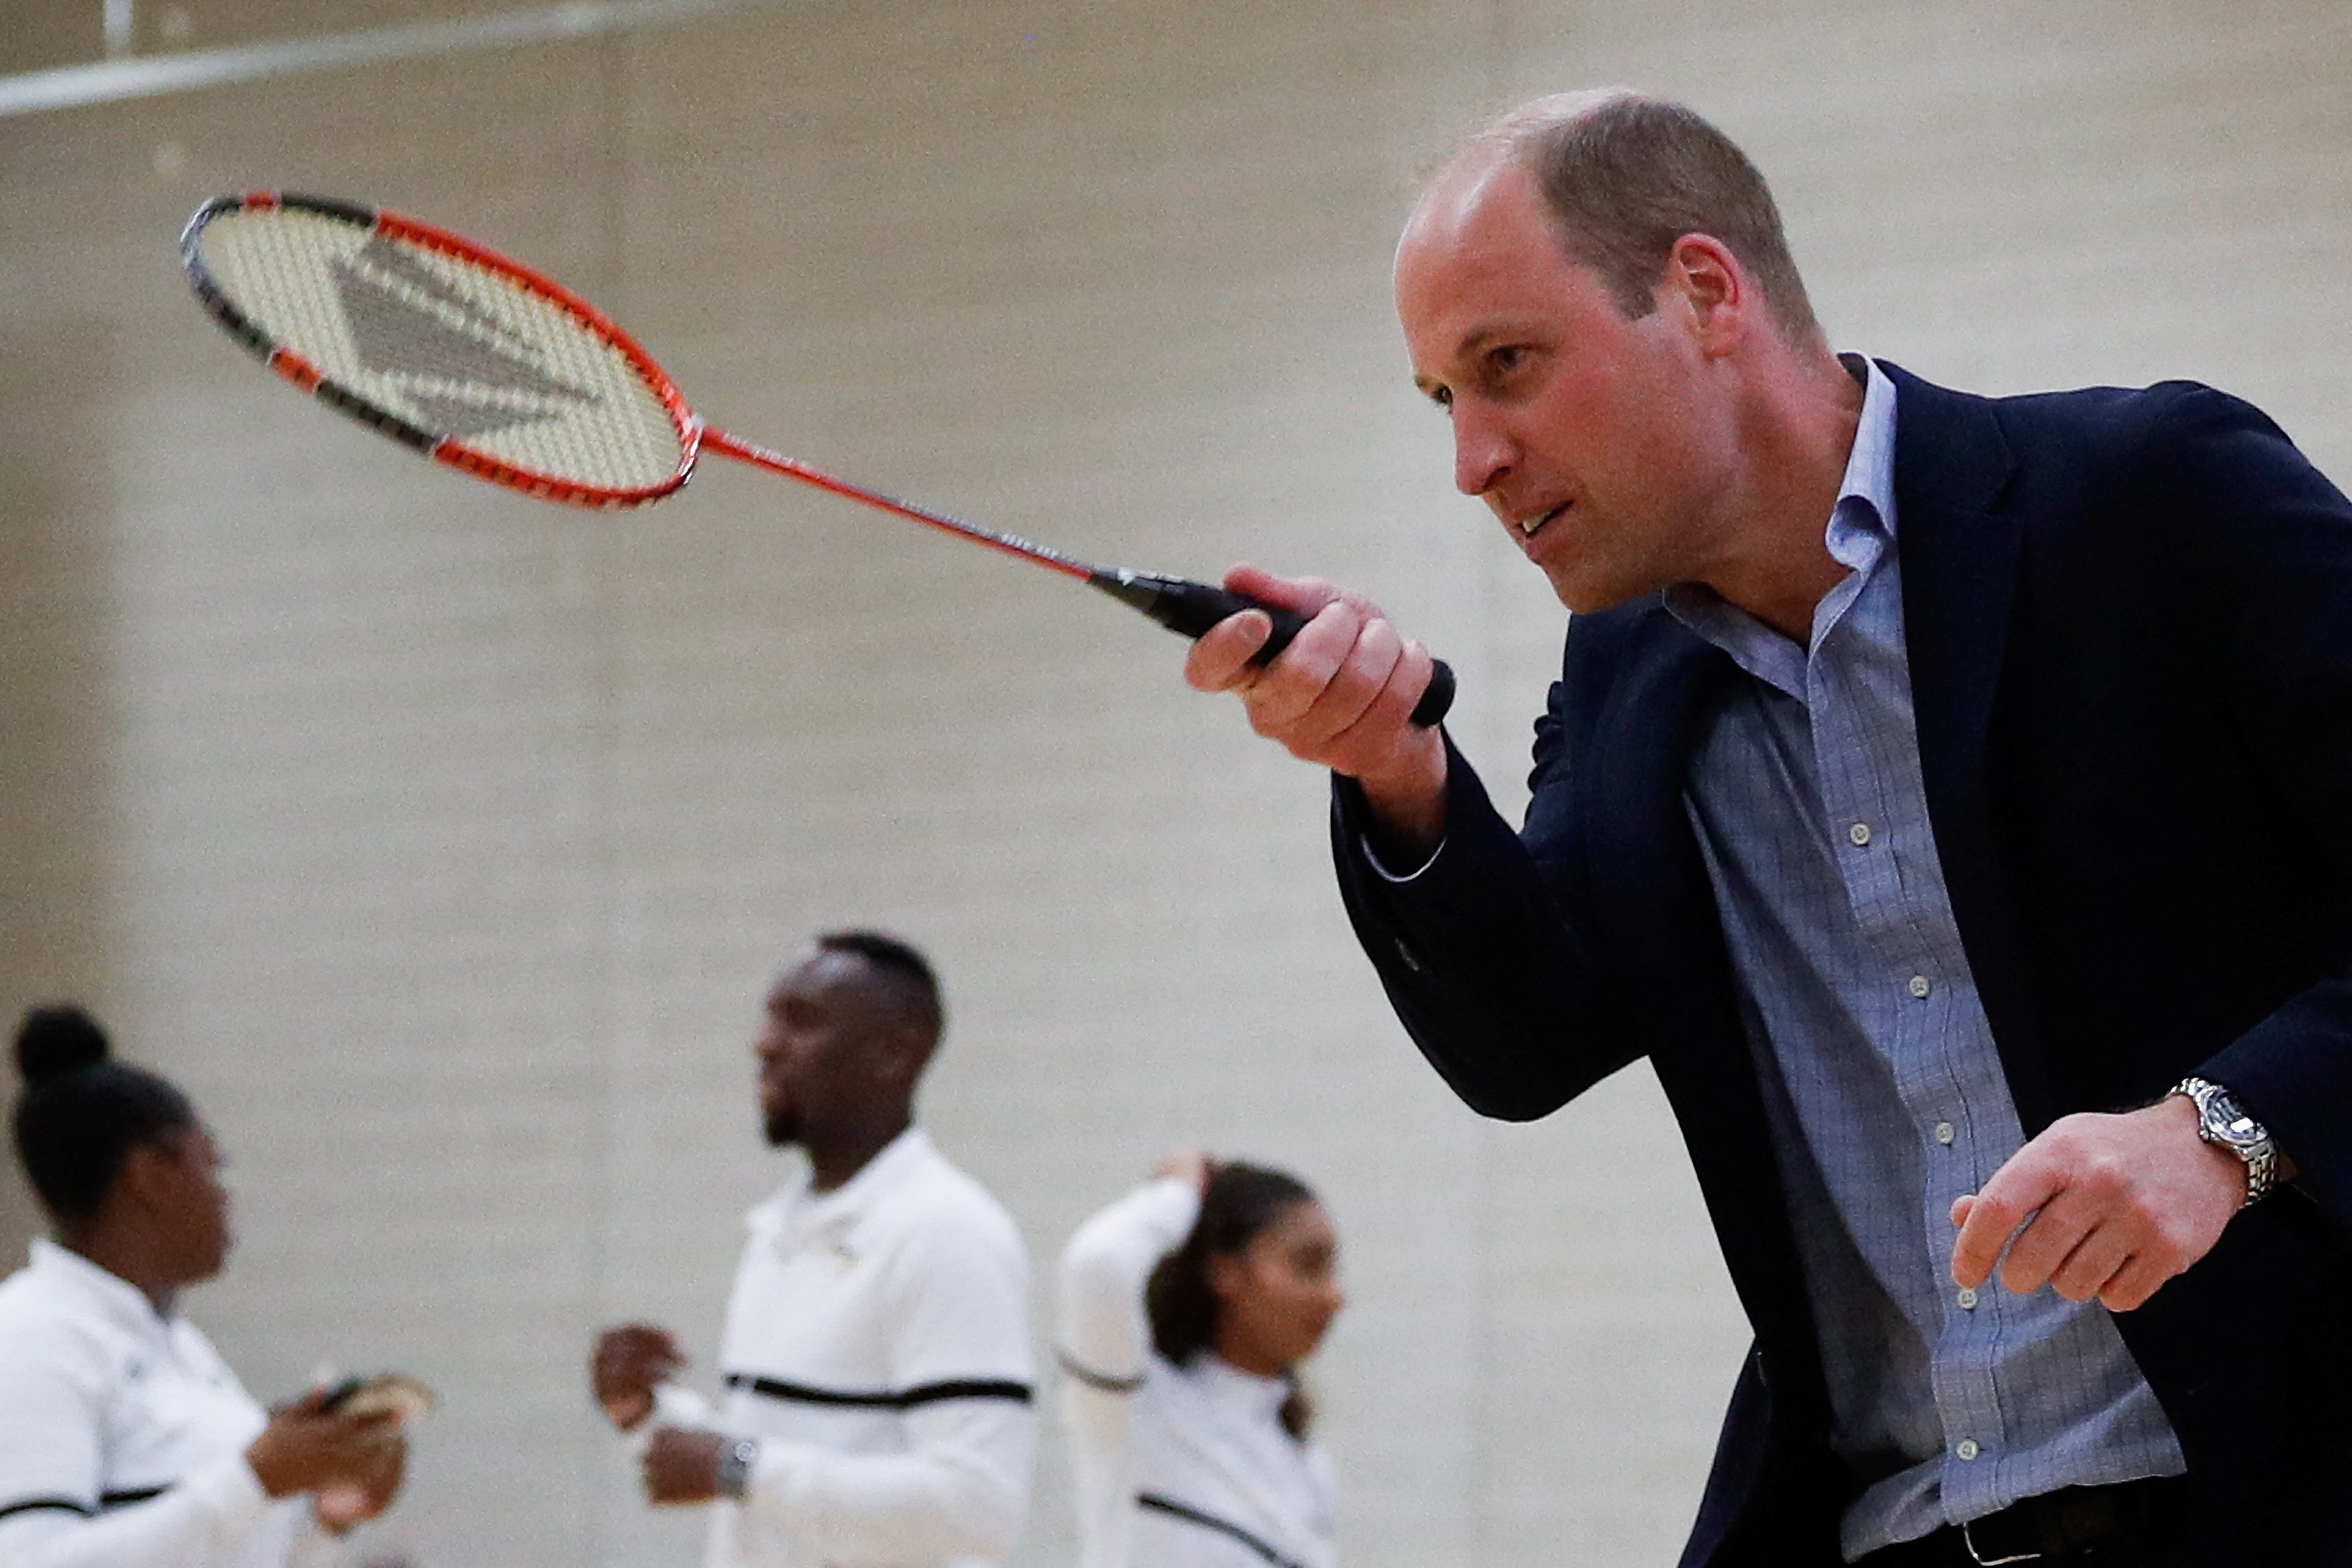 William tries luck at badminton as Birmingham prepares for Commonwealth Games The Independent